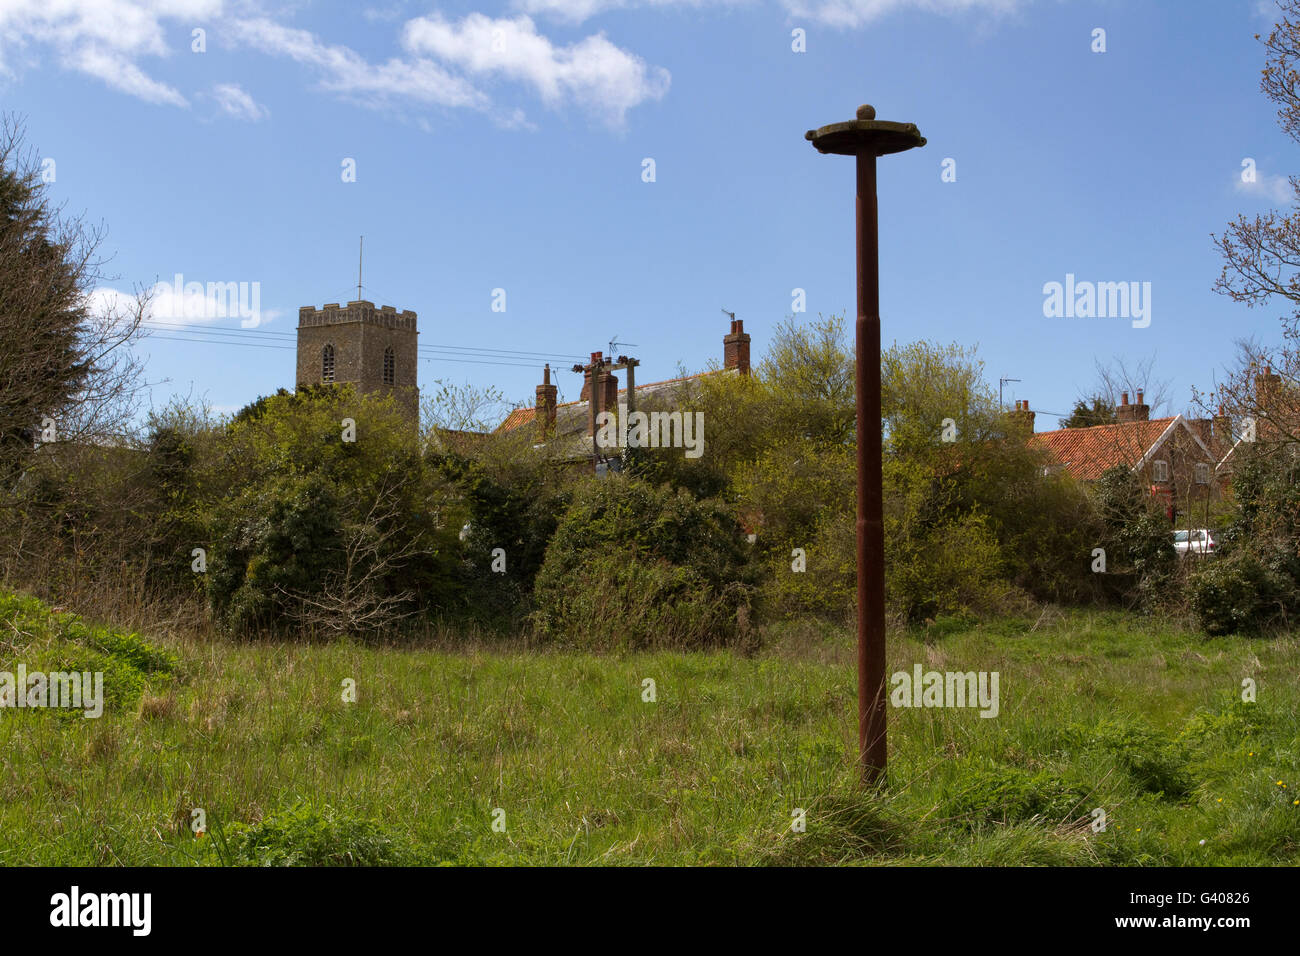 A rusty mysterious pole in a Suffolk village that possibly is disused children's play equipment Stock Photo